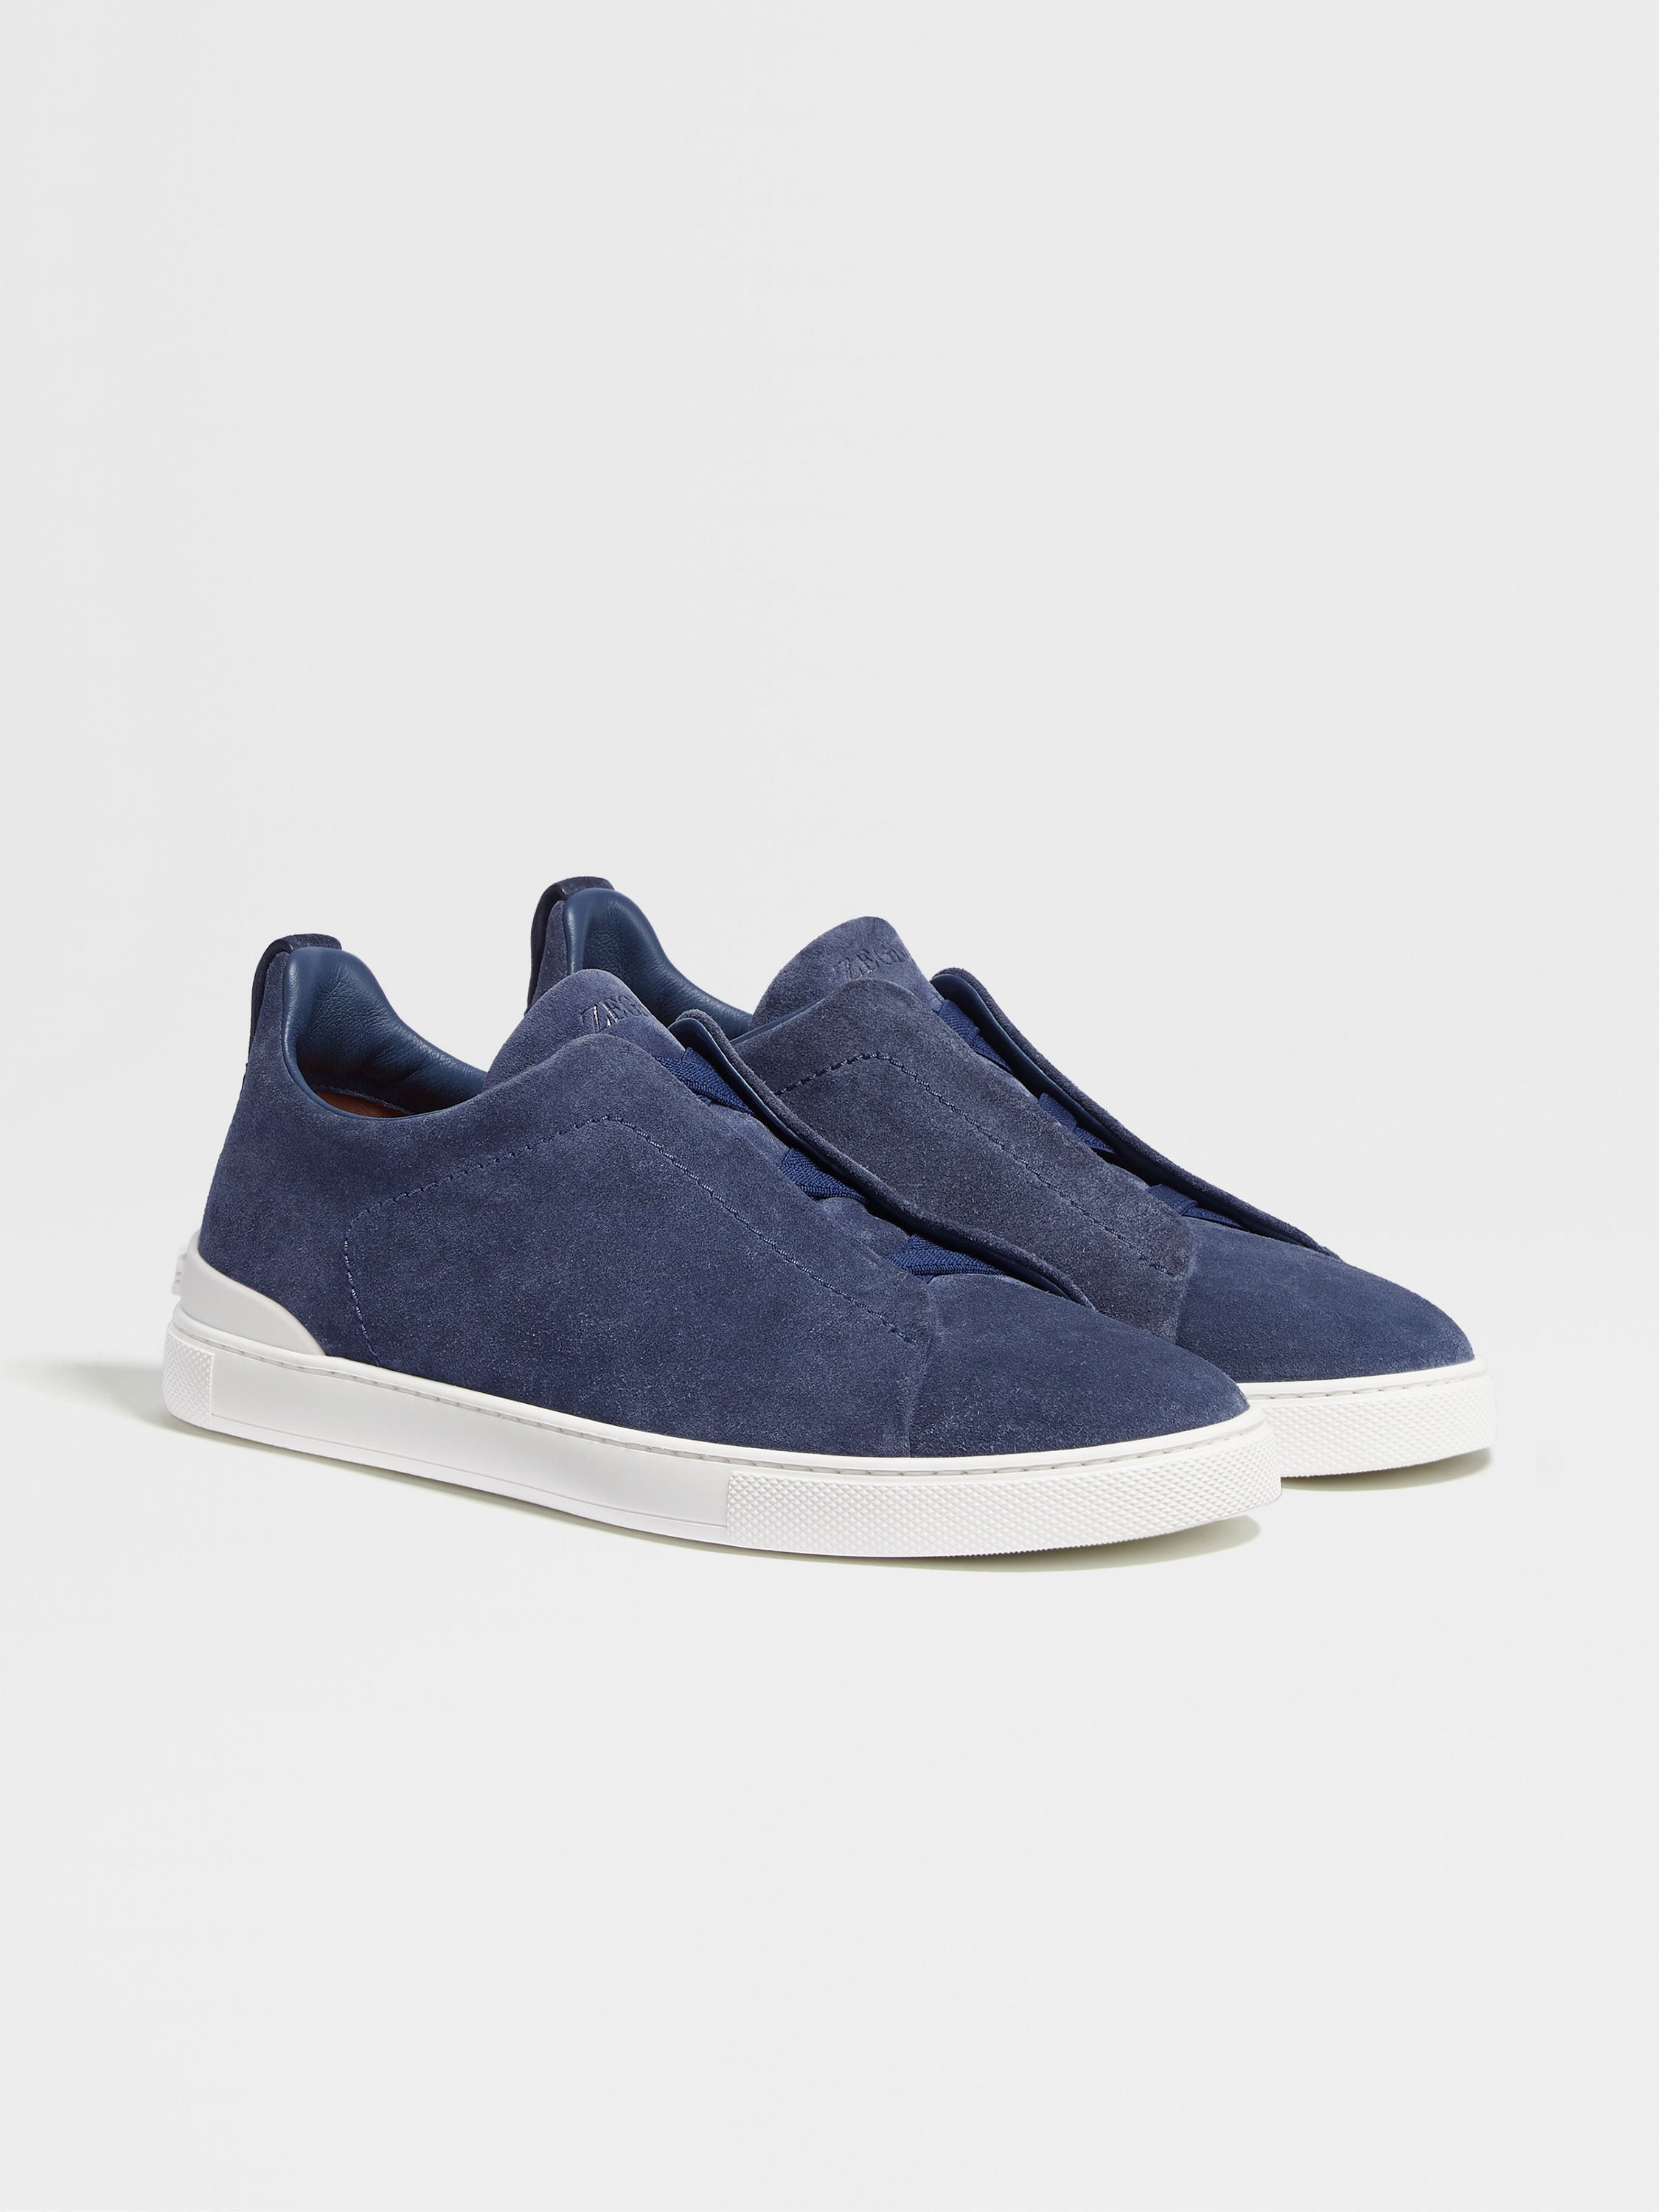 Utility Blue Suede Triple Stitch™ Sneakers